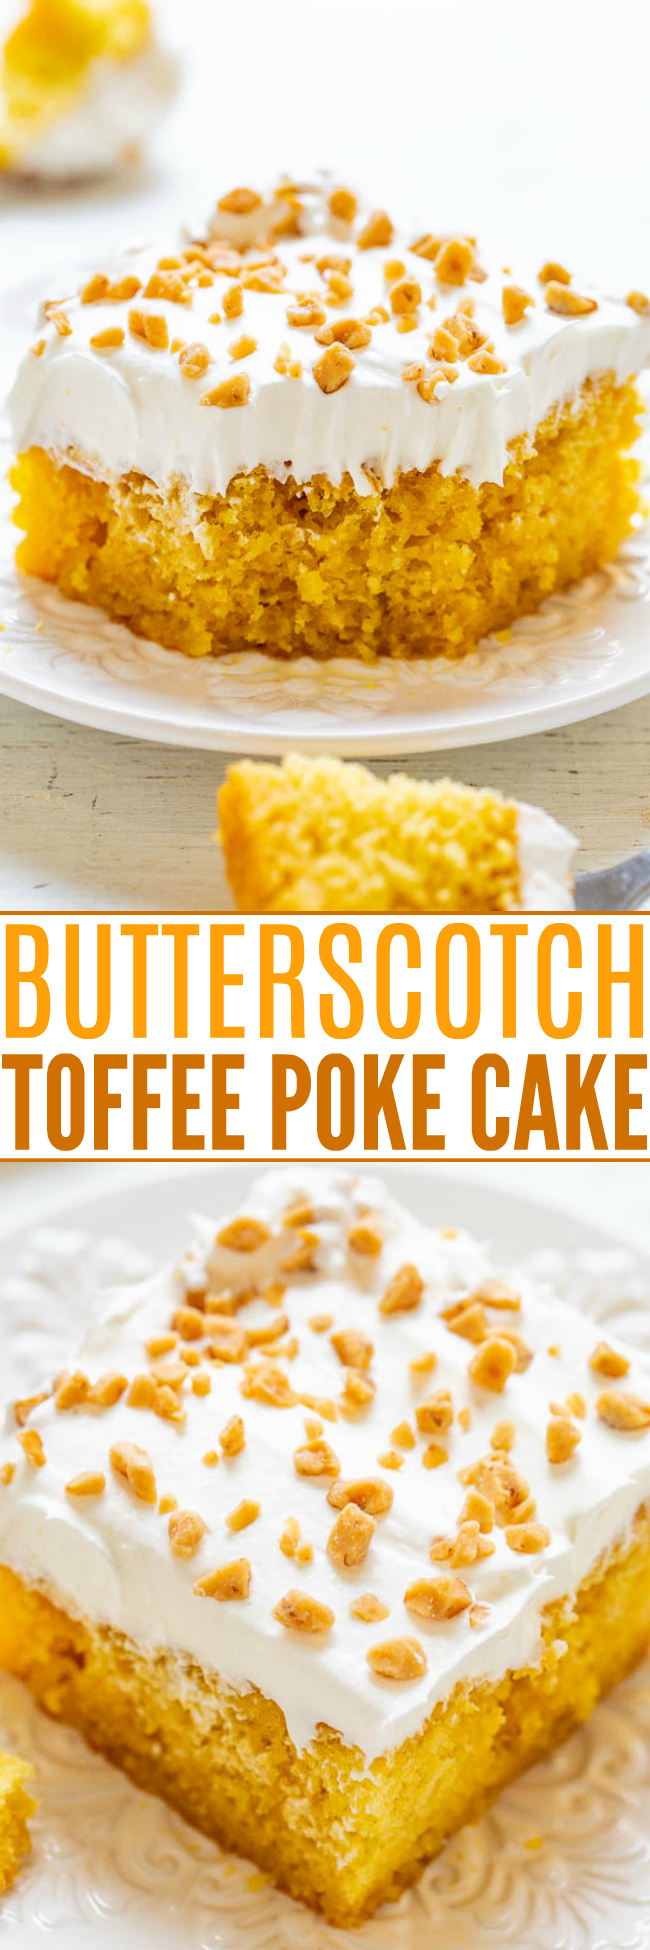 Toffee Butterscotch Cake — Butterscotch sundae topping isn't just for ice cream - it makes AWESOME poke cakes!! Along with the irresistibly crunchy toffee bits, this is a perfect fast and EASY cake everyone will love!! 